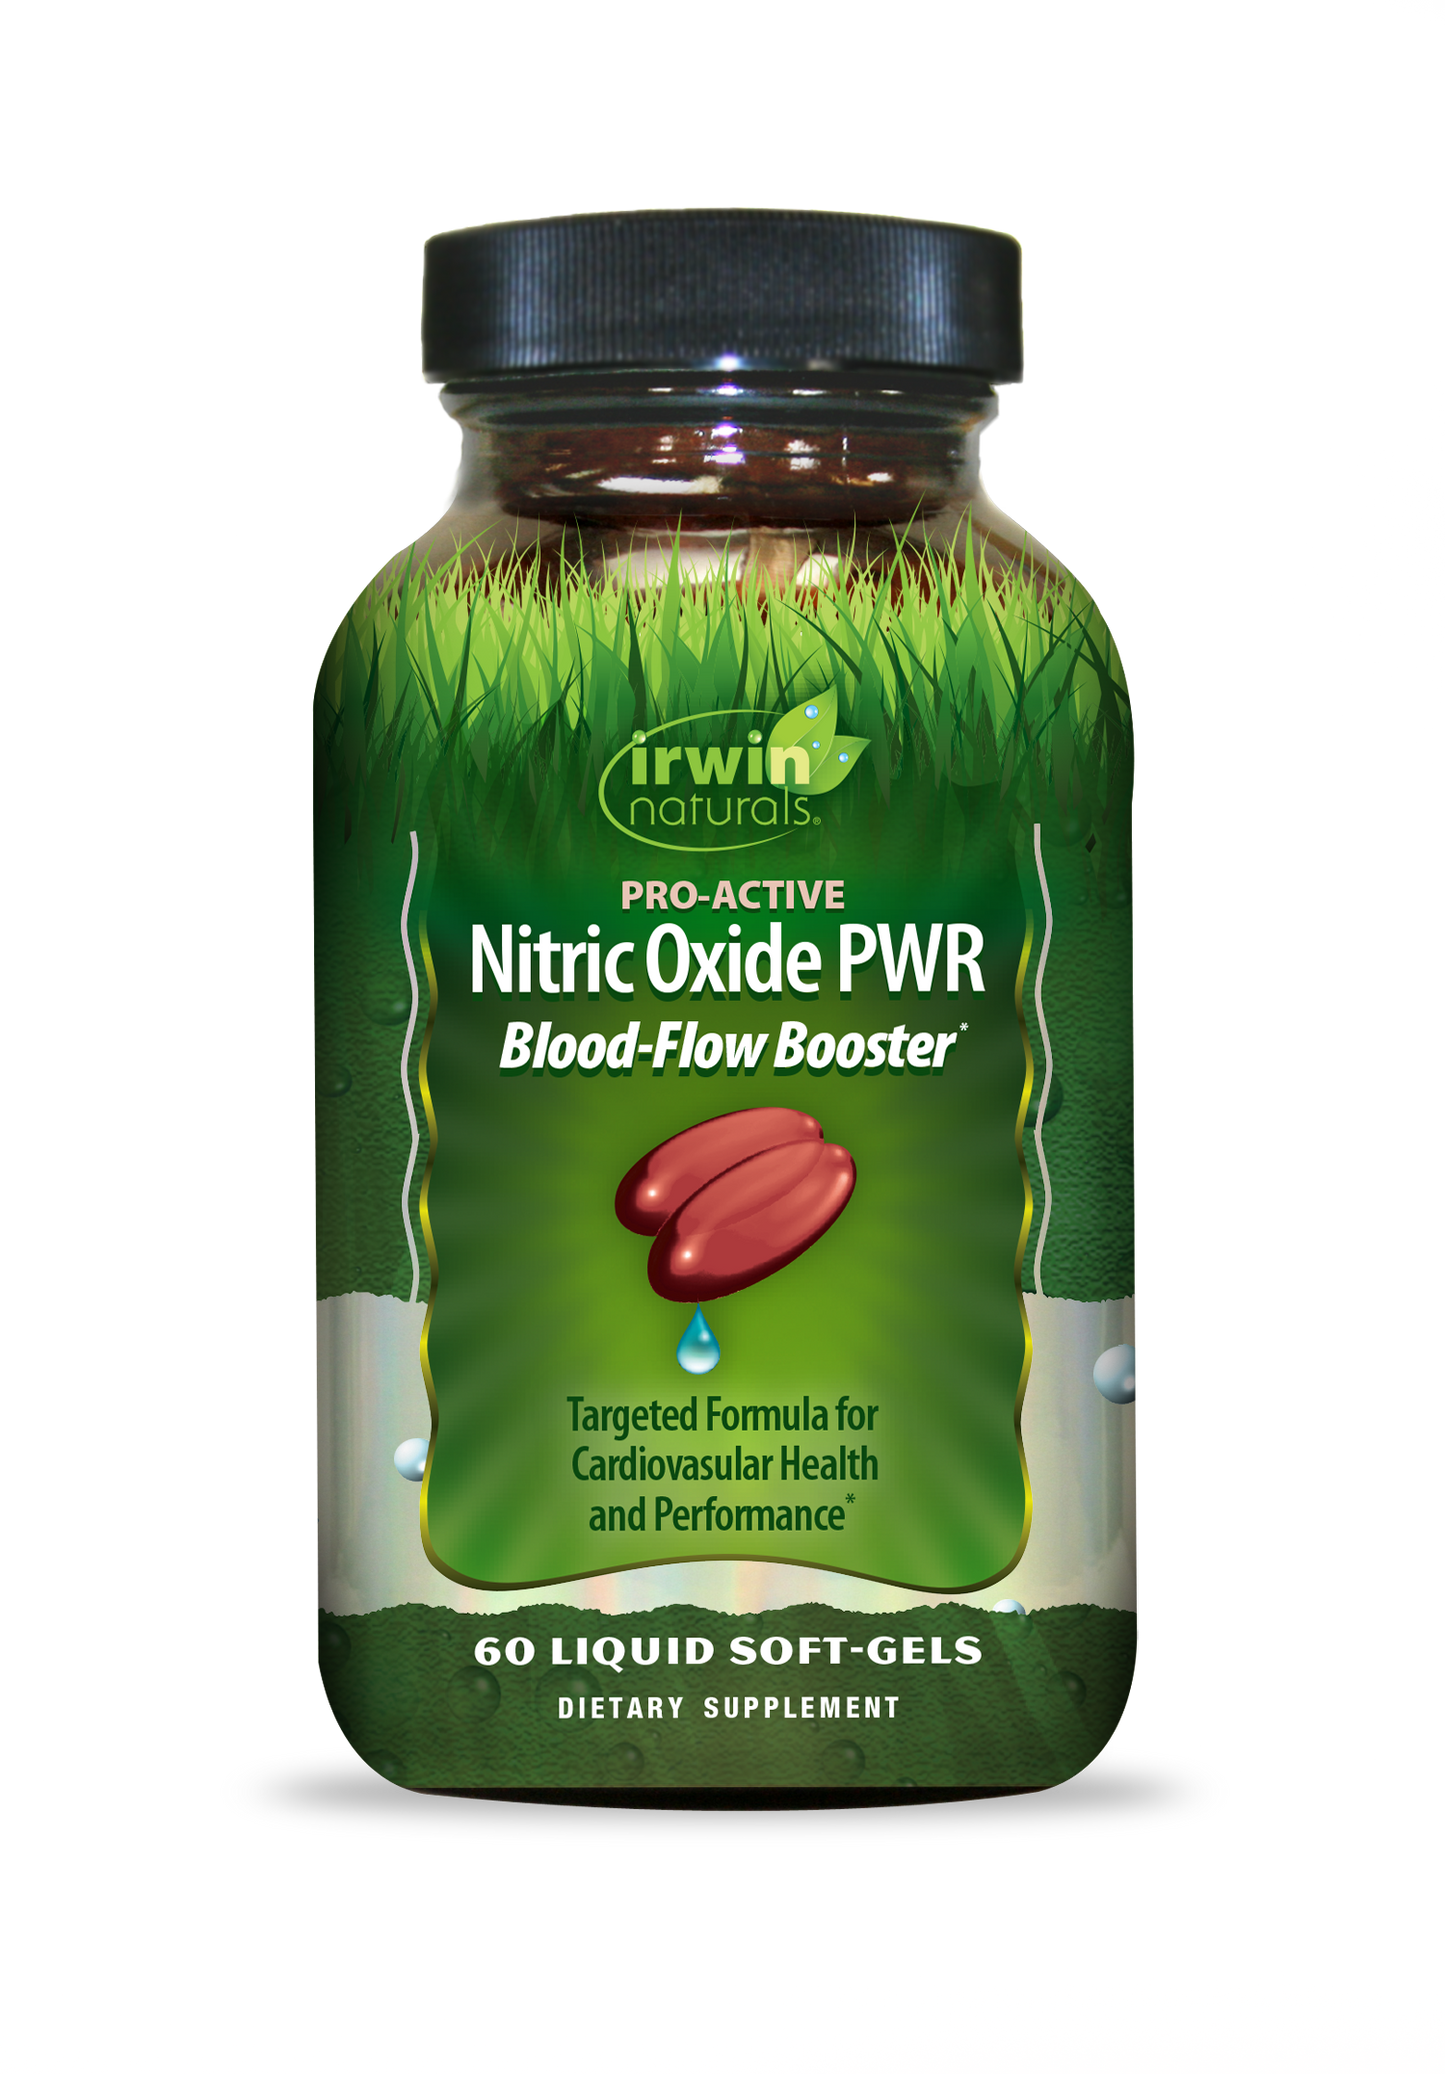 Pro-Active Nitric Oxide